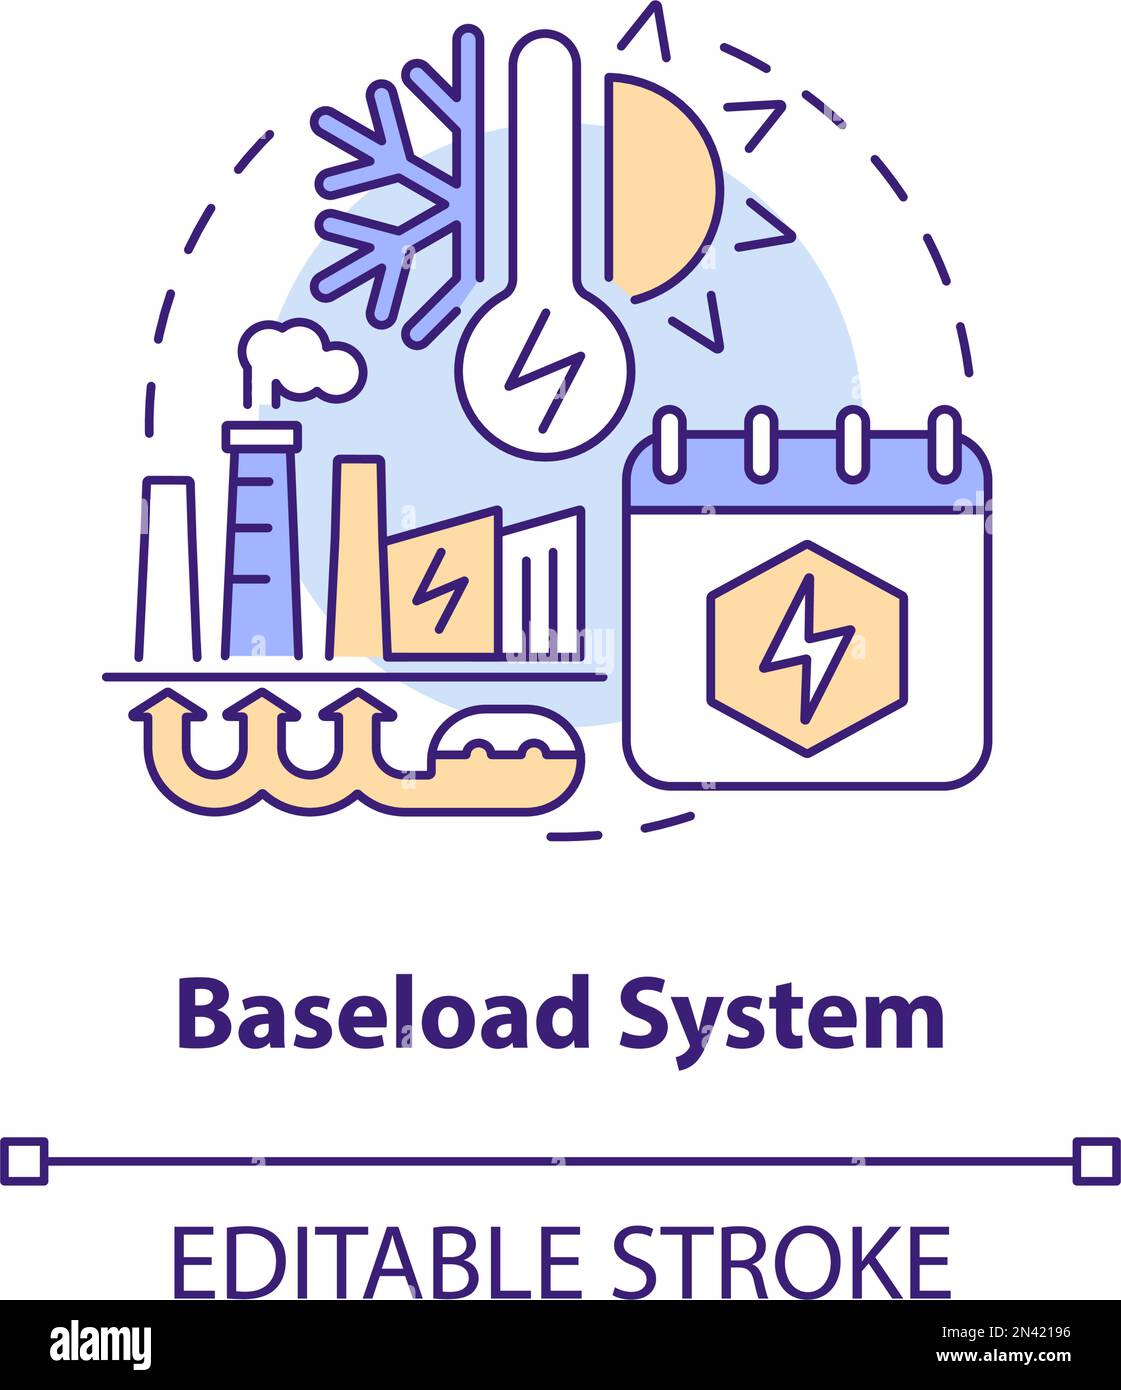 Baseload system concept icon Stock Vector